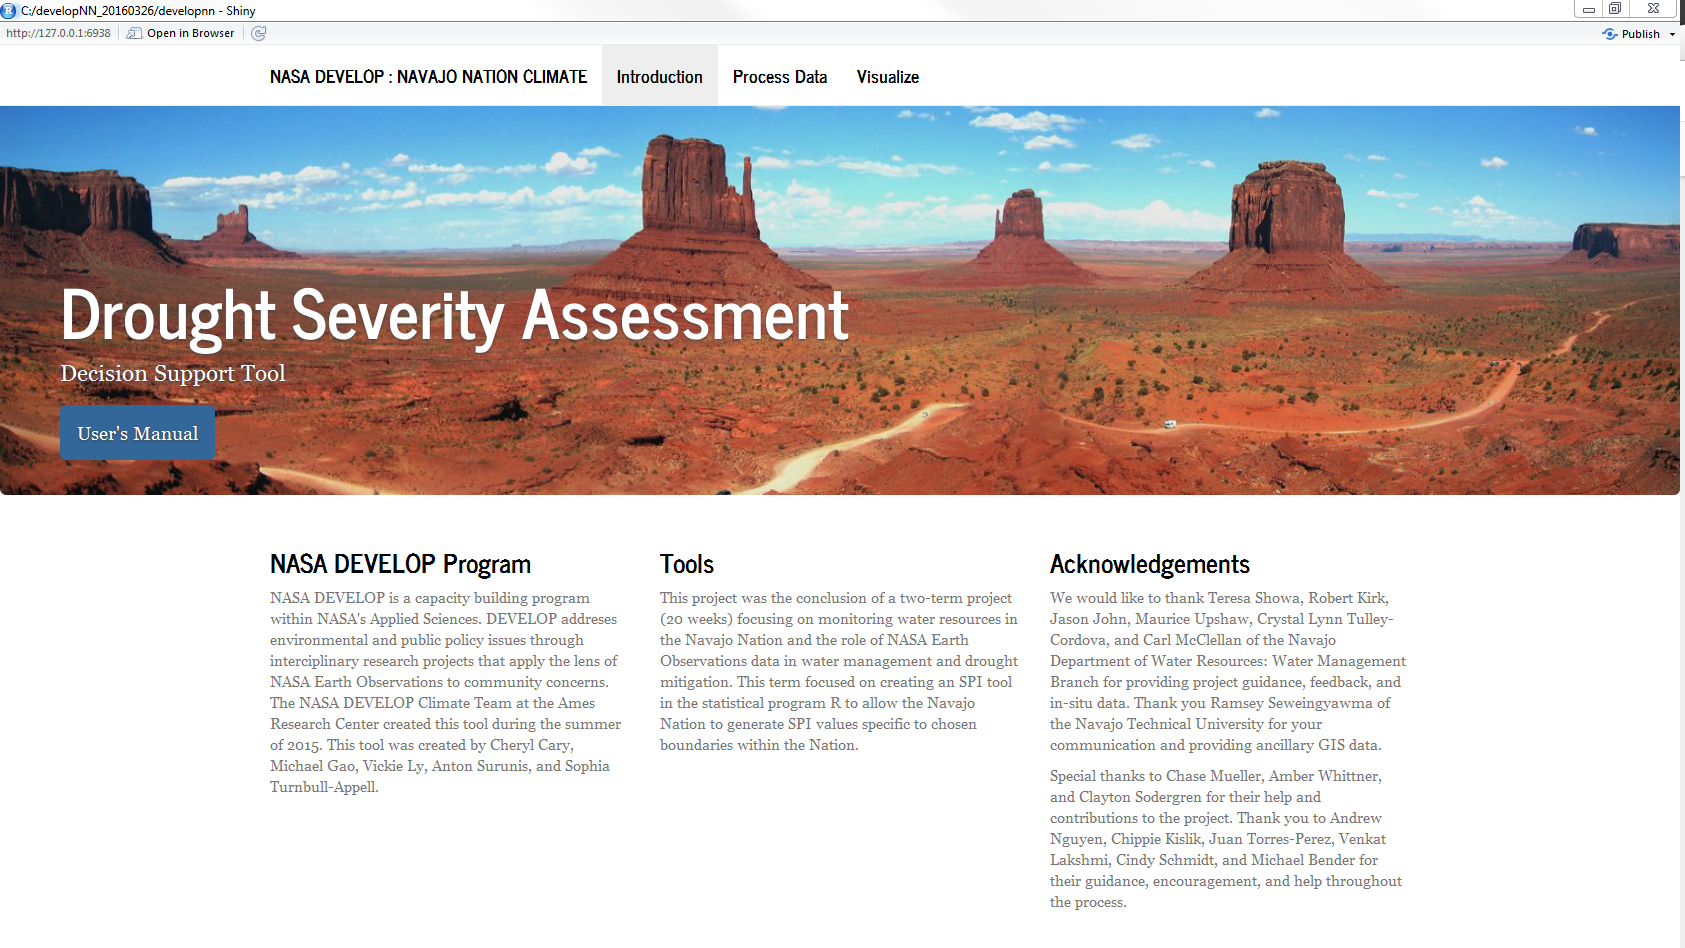 A preview screenshot of the eventual Drought Severity Assessment Tool created by NASA DEVELOP with the Navajo Nation Department of Water Resources. Image courtesy of NASA DEVELOP.